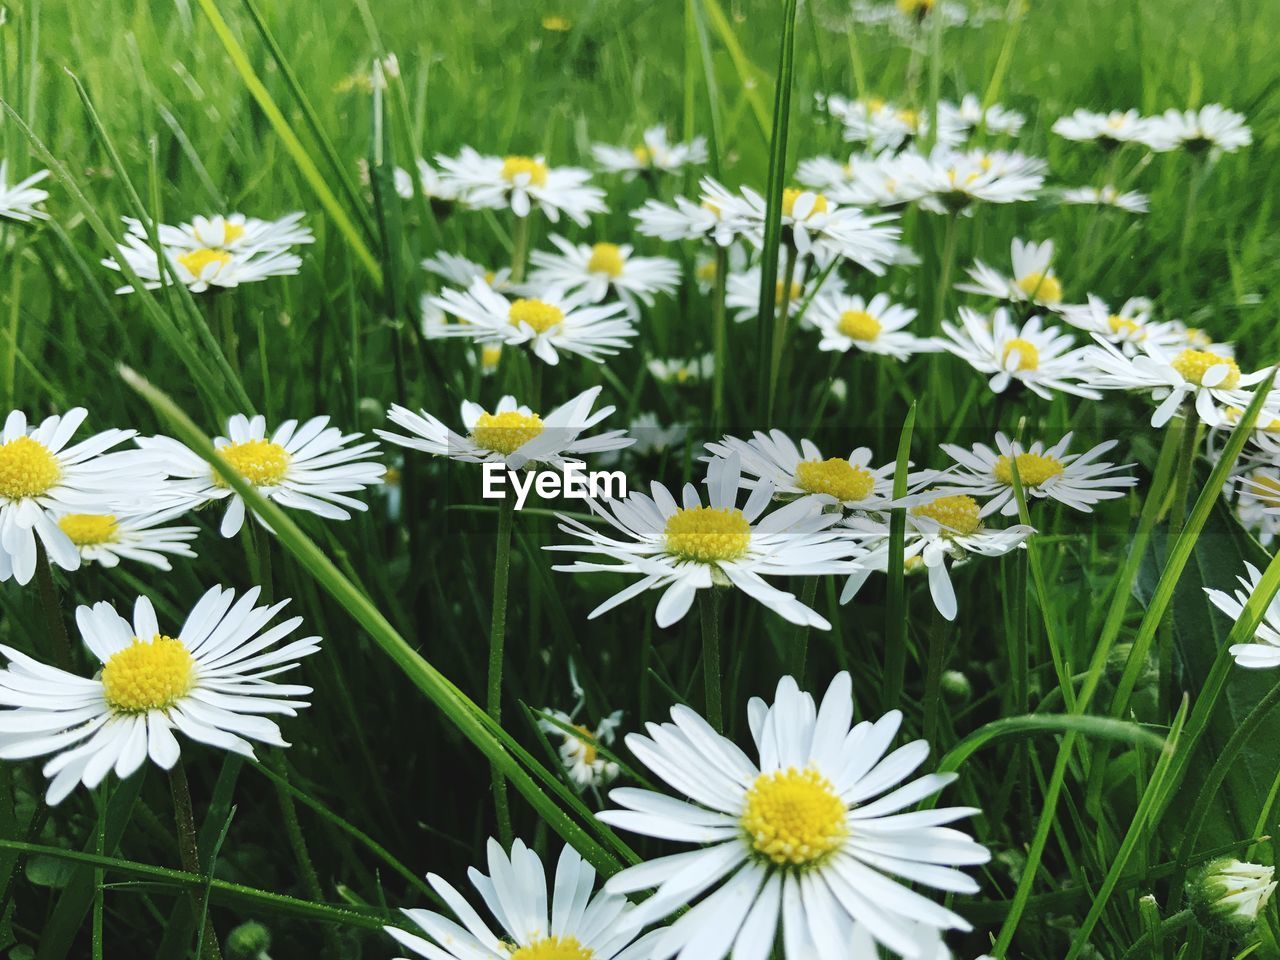 flower, flowering plant, plant, freshness, beauty in nature, fragility, petal, growth, meadow, grass, daisy, flower head, nature, white, inflorescence, close-up, field, no people, green, yellow, lawn, pollen, herb, botany, land, day, springtime, outdoors, focus on foreground, plain, wildflower, blossom